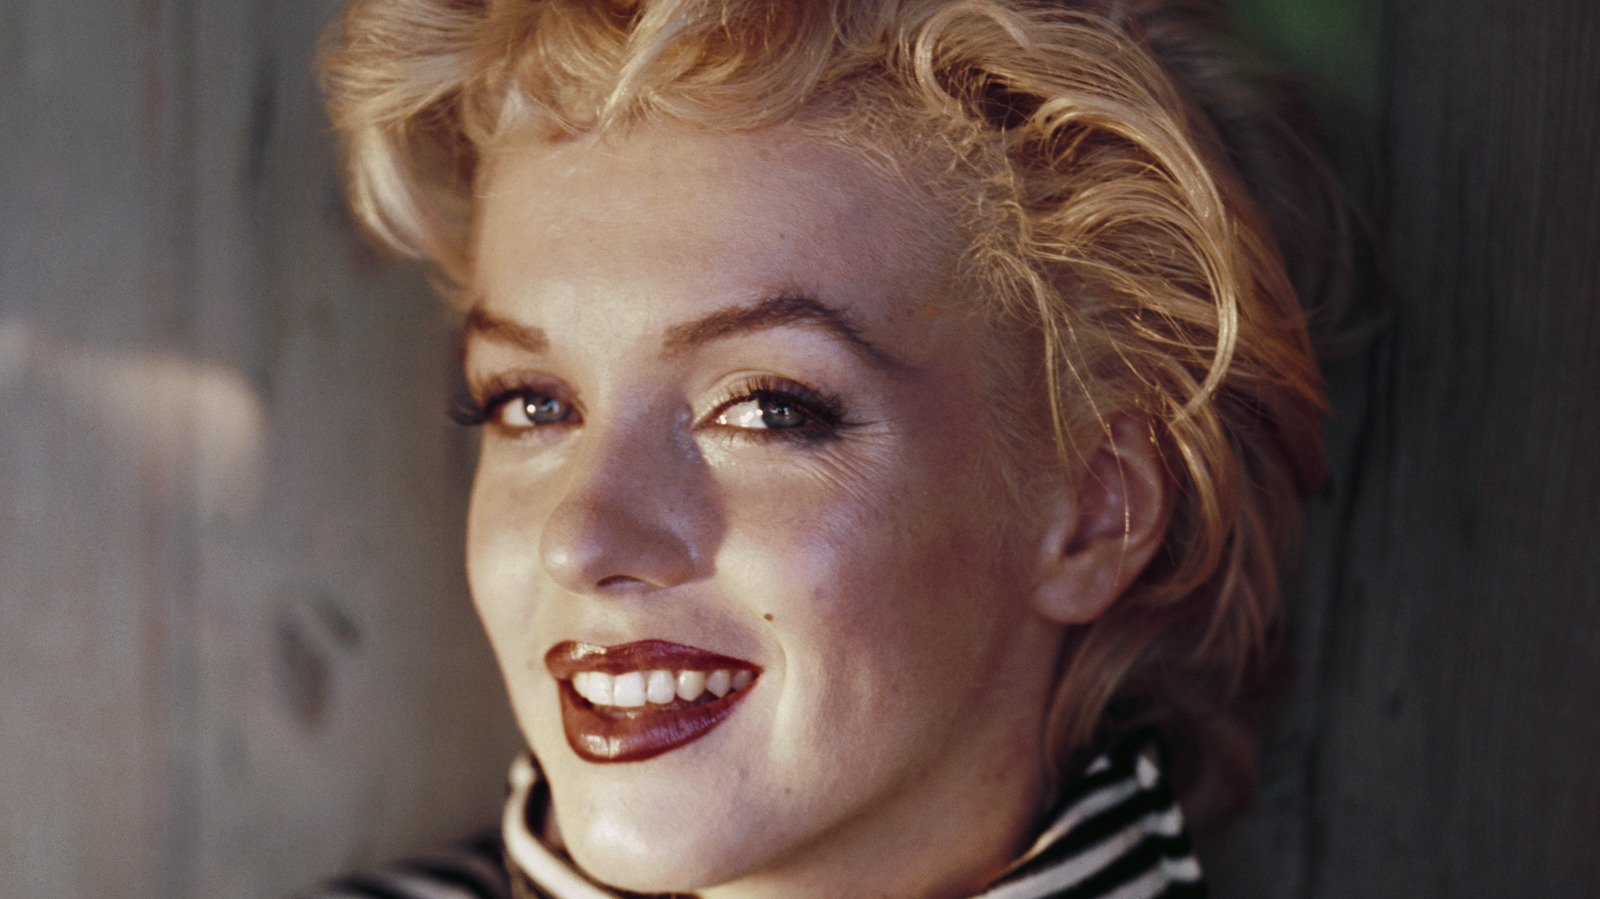 40 Rare Photos of Marilyn Monroe You've Probably Never Seen - Marilyn Monroe  Pictures